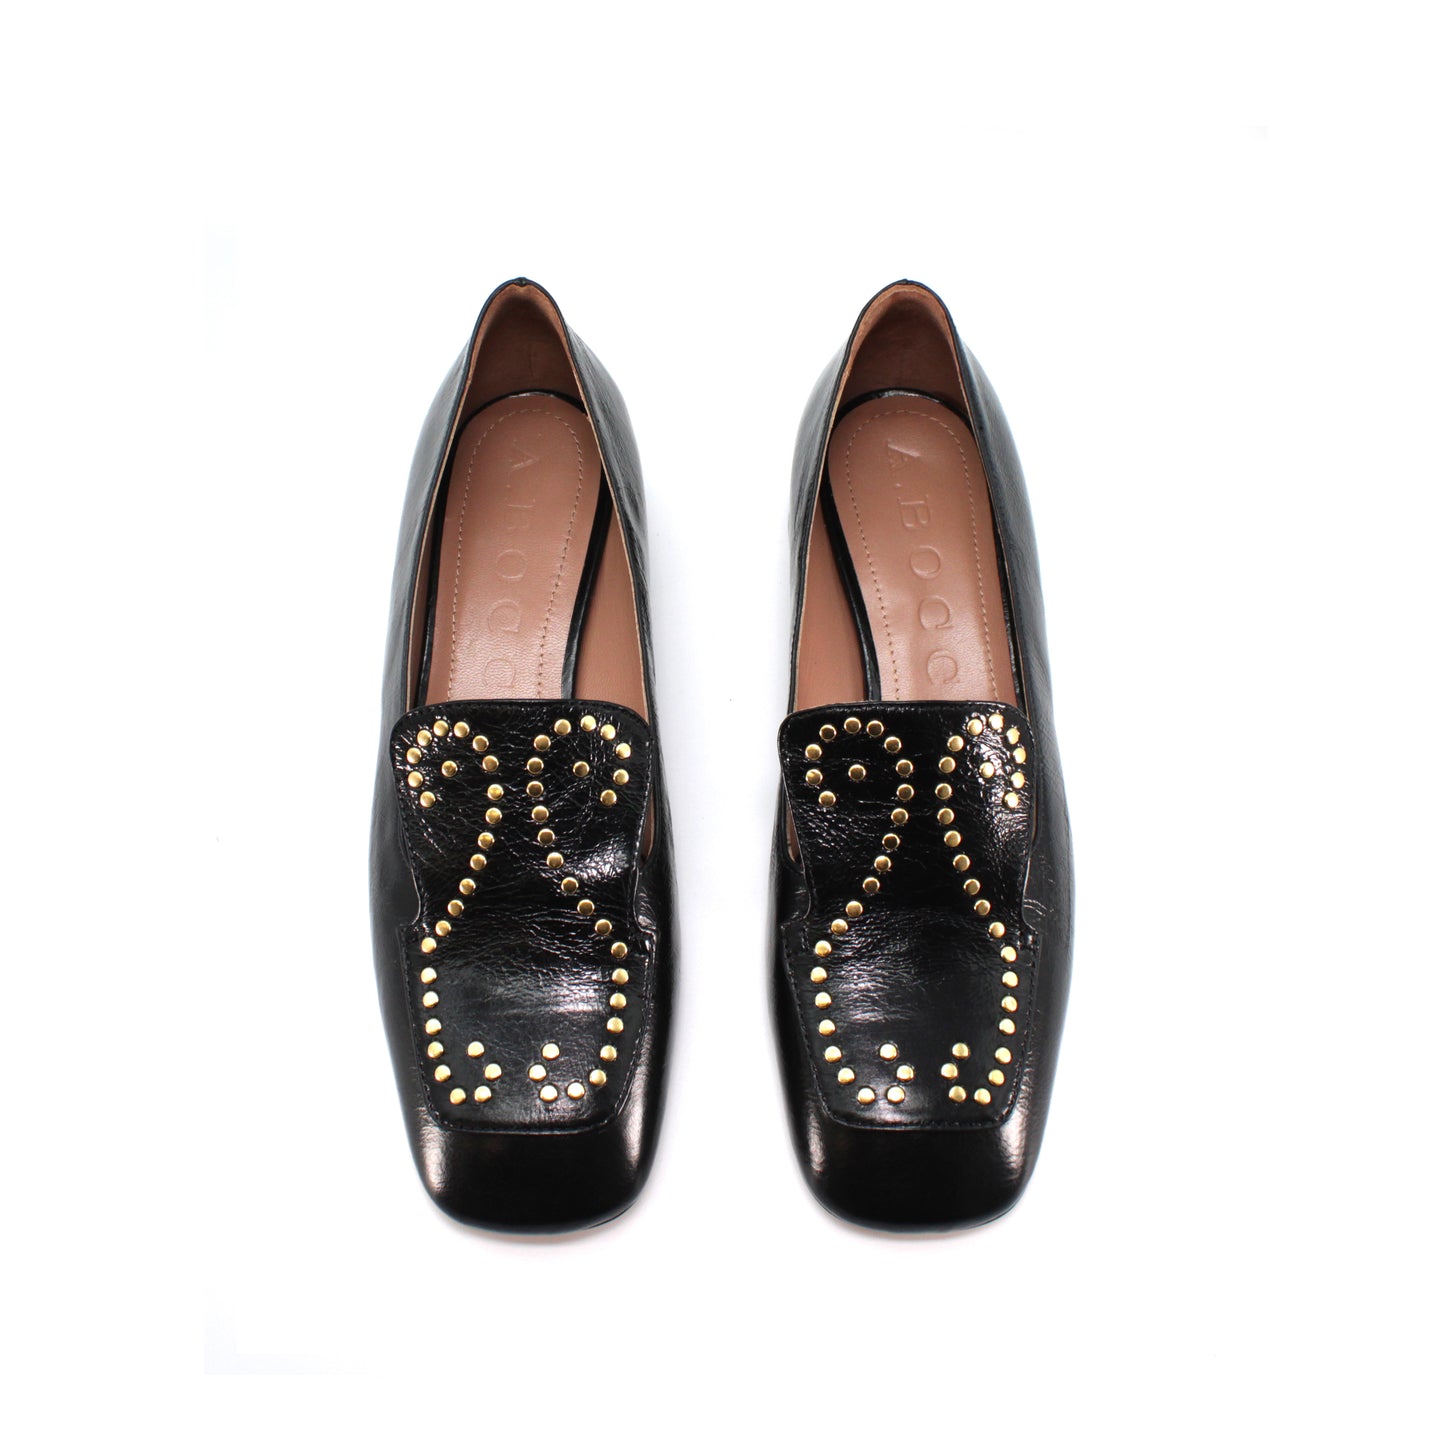 Black "new vintage" leather moccasin - Second life